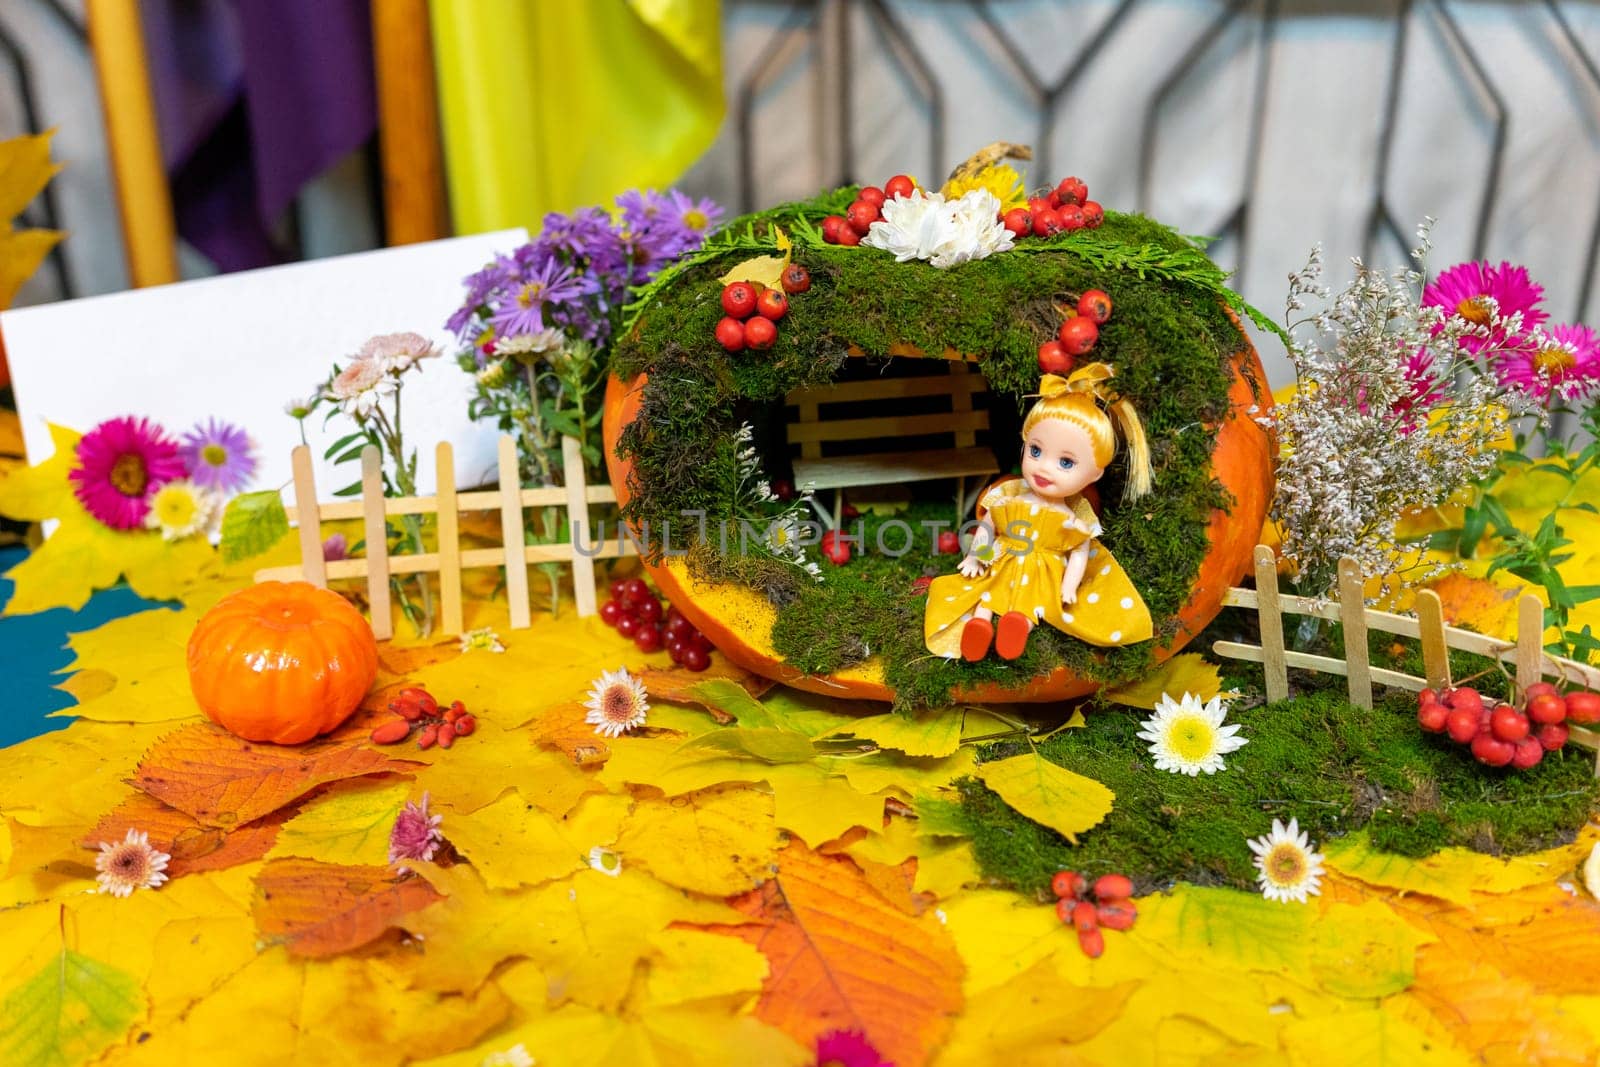 The doll house is made of pumpkin and natural materials by Serhii_Voroshchuk